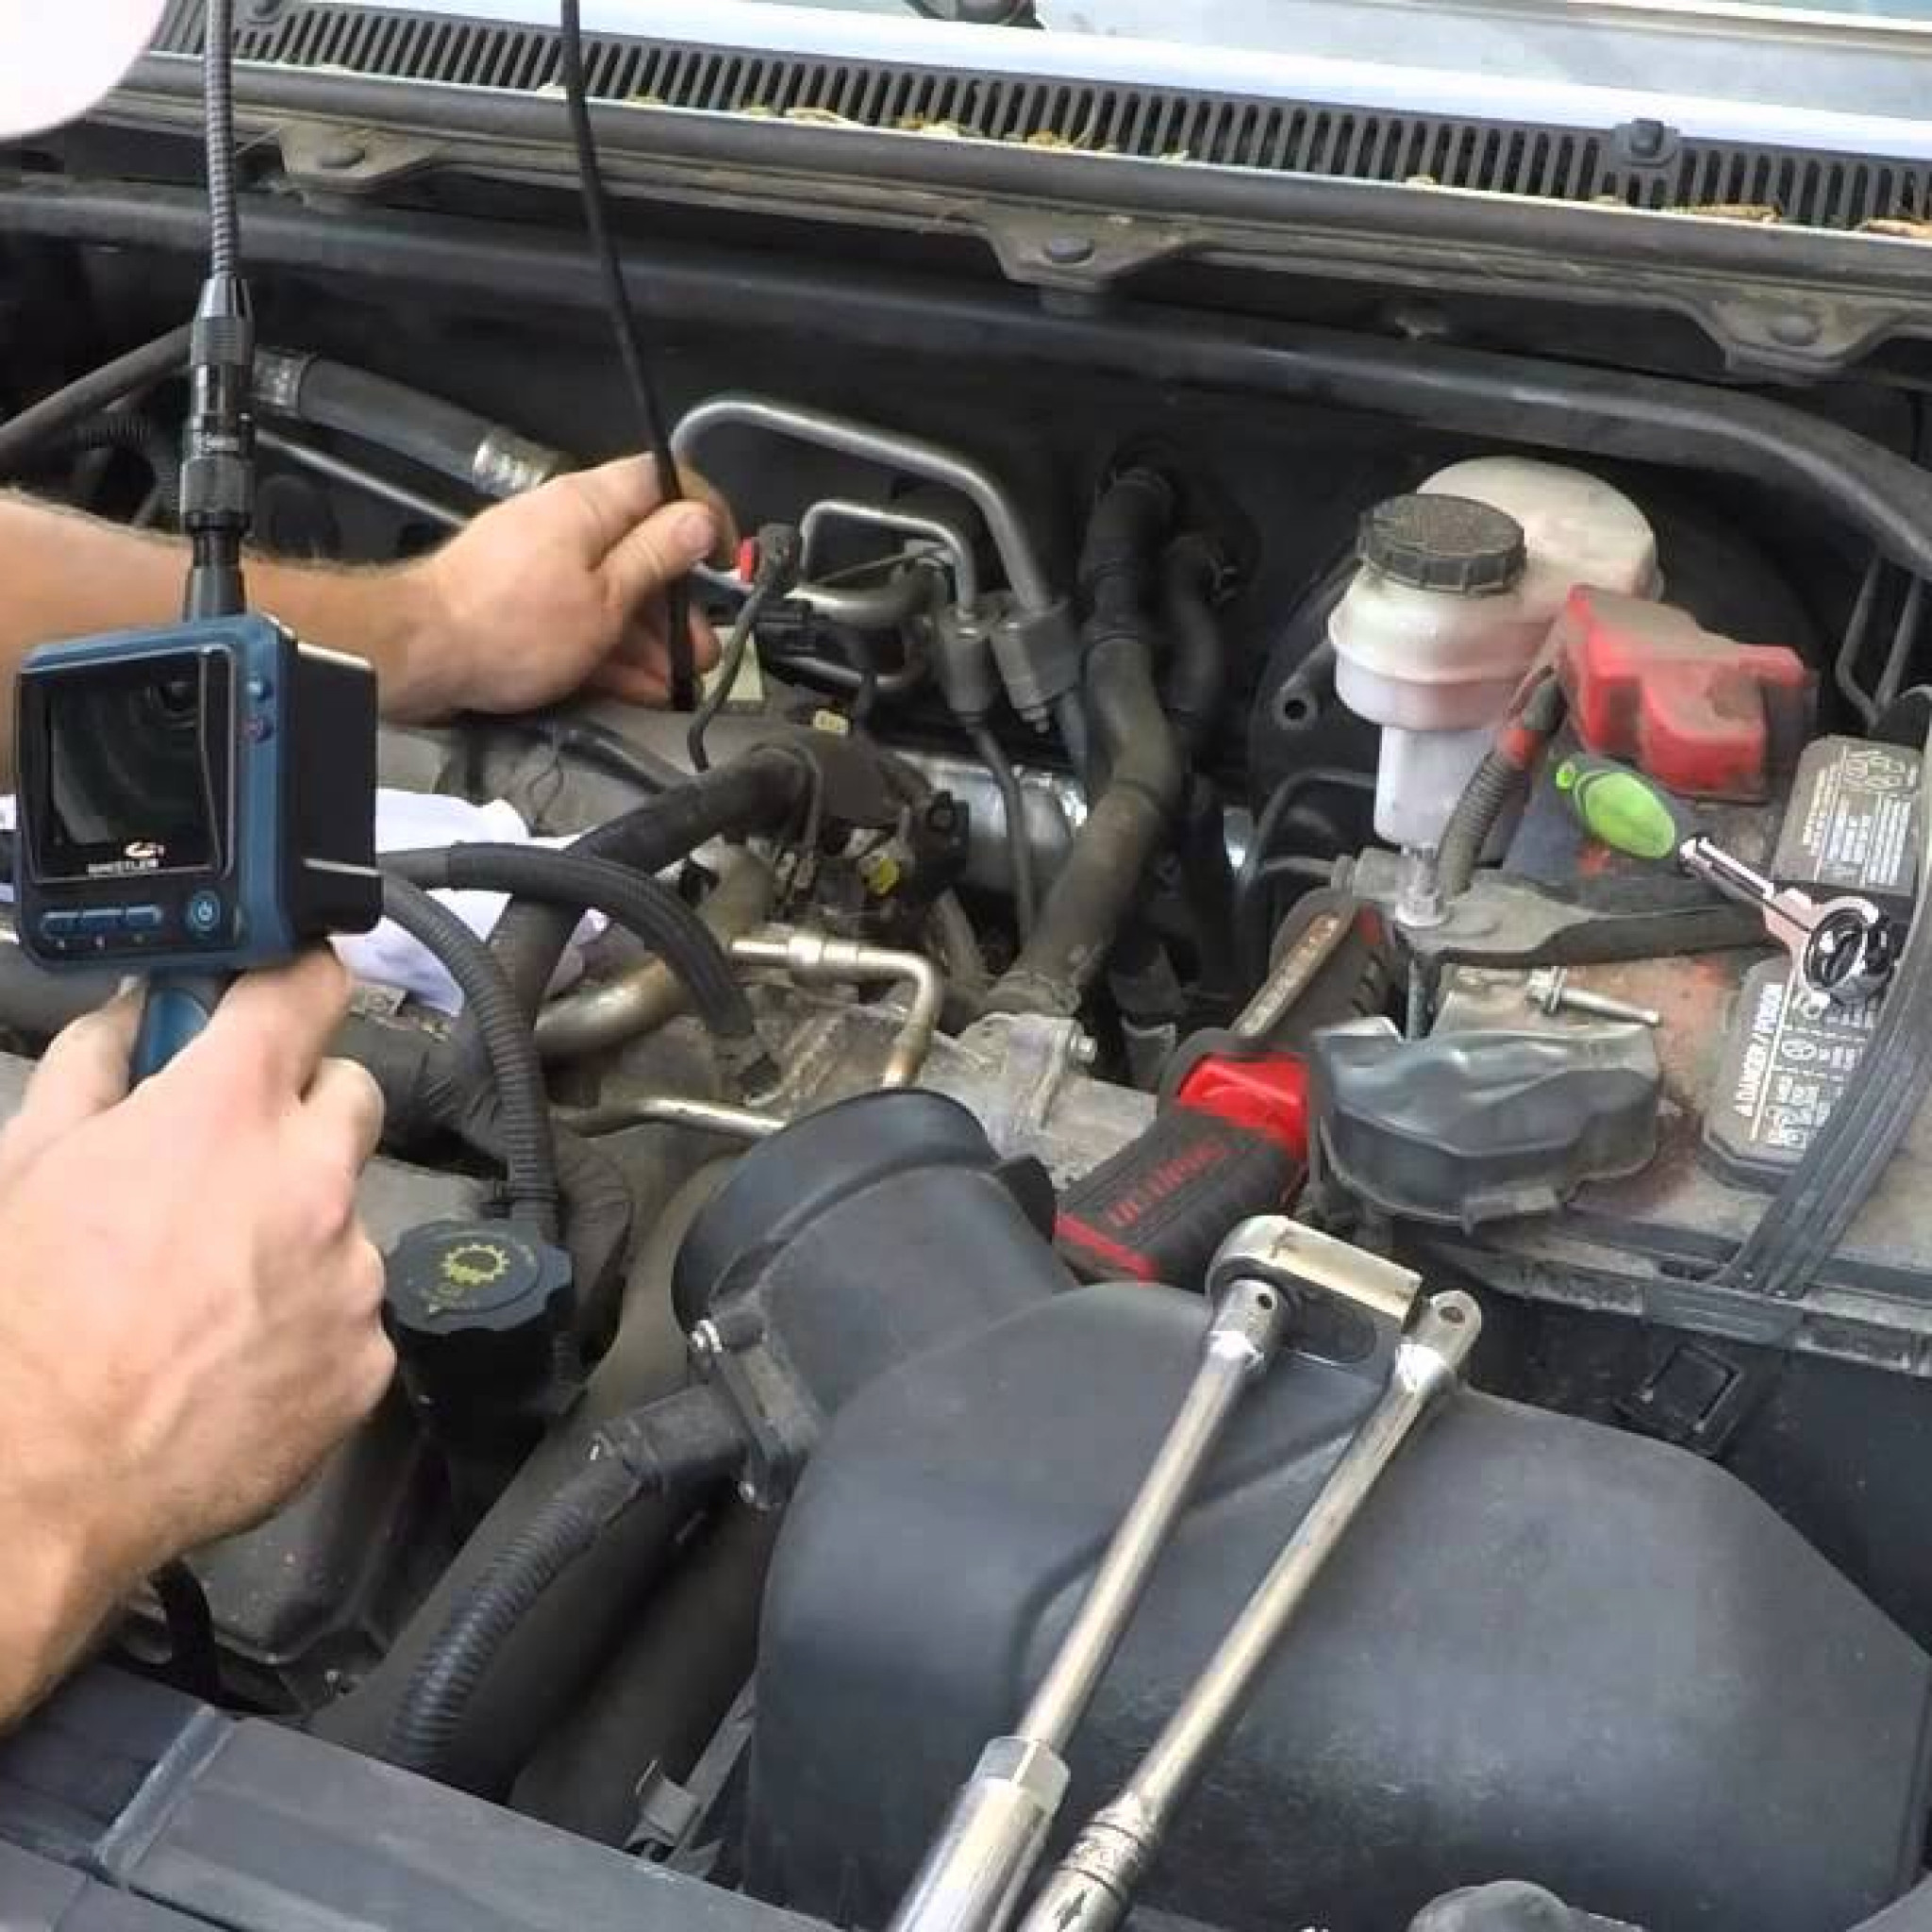 Ford Flex 3.5 Tune Up, How To Replace Spark Plugs And Coils | Wiring